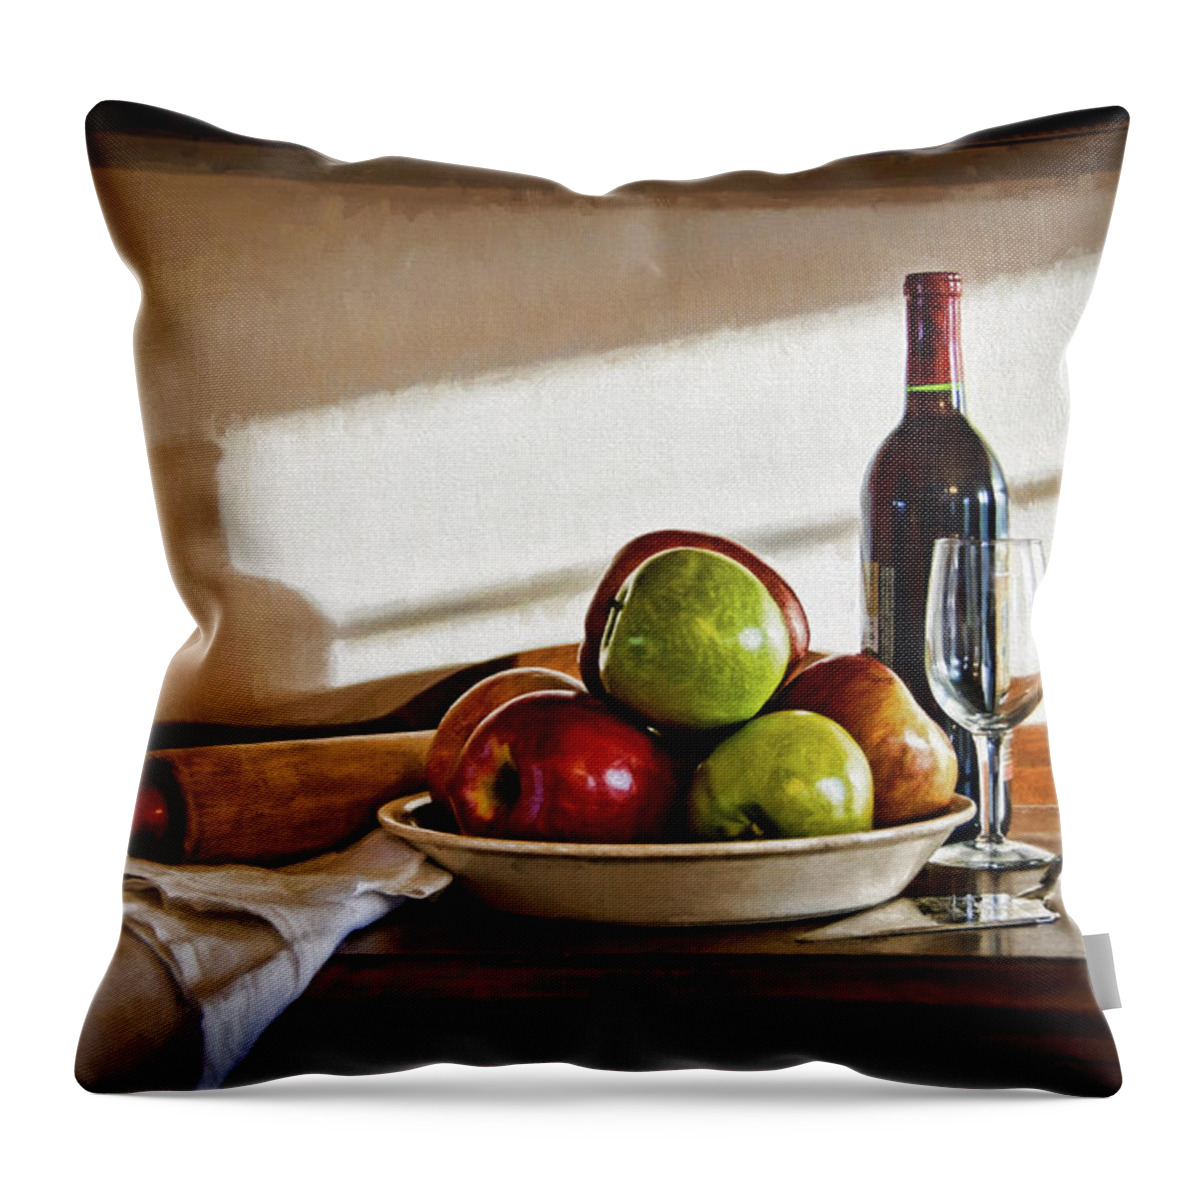 apple Pie Throw Pillow featuring the photograph Apple Pie by Cricket Hackmann